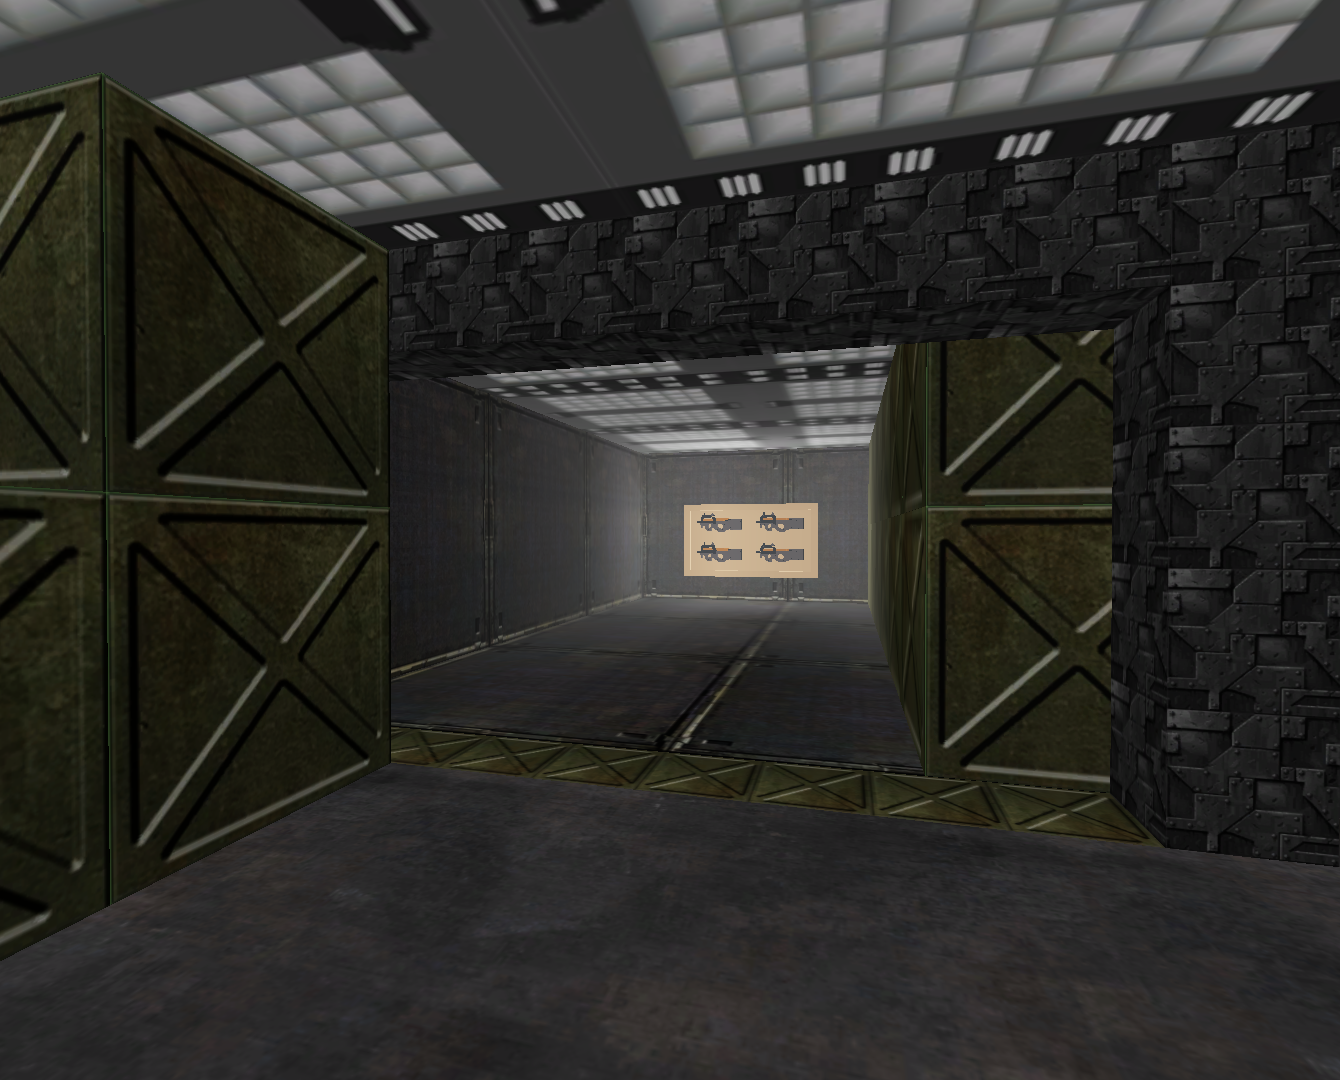 Breaking Into Kyrons Bunker! (Lone Survival) (Roblox) 